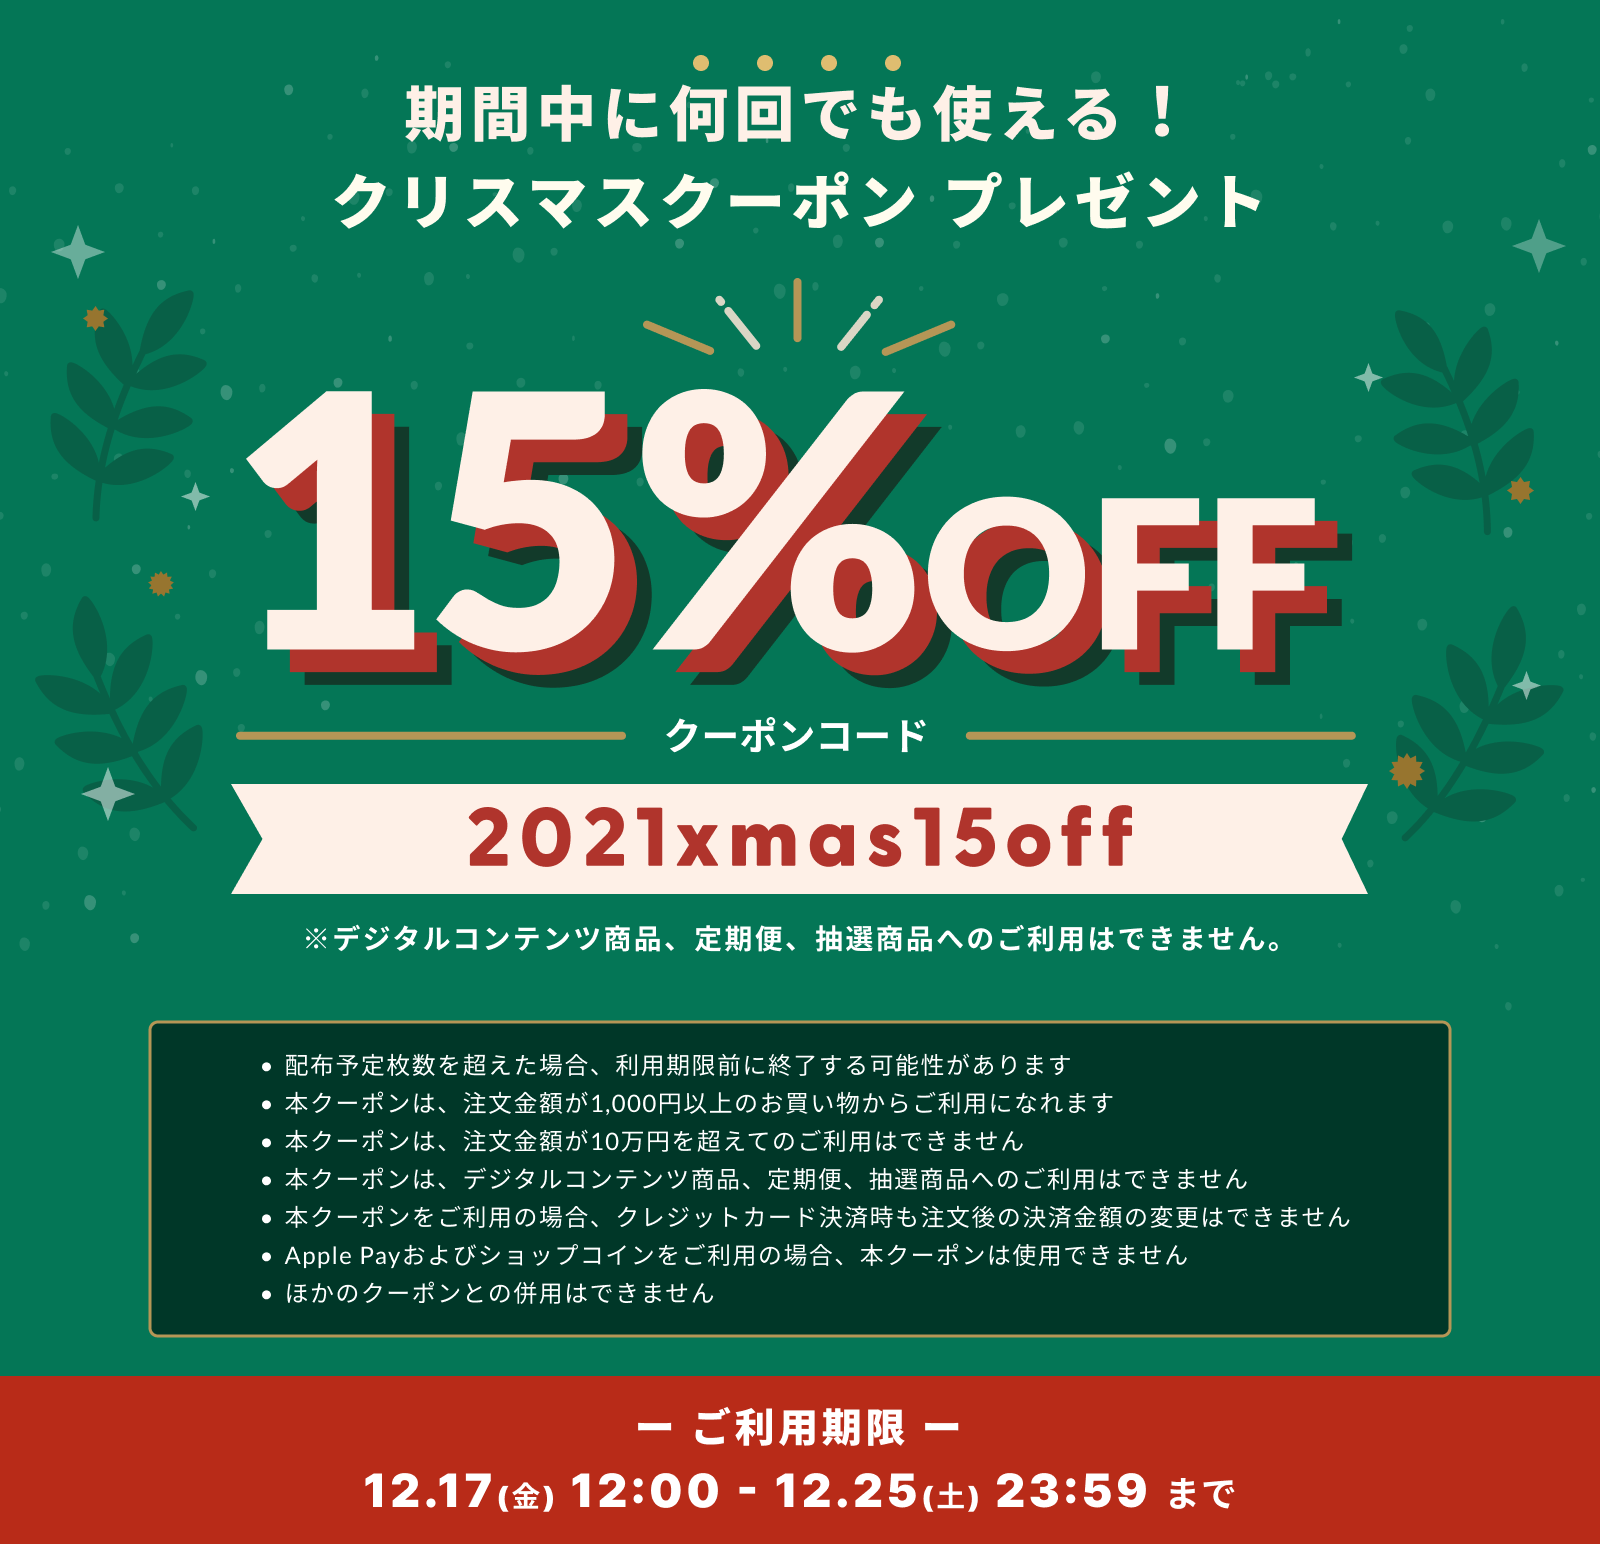 【ONLINE SHOP限定】15％OFFクーポンプレゼント